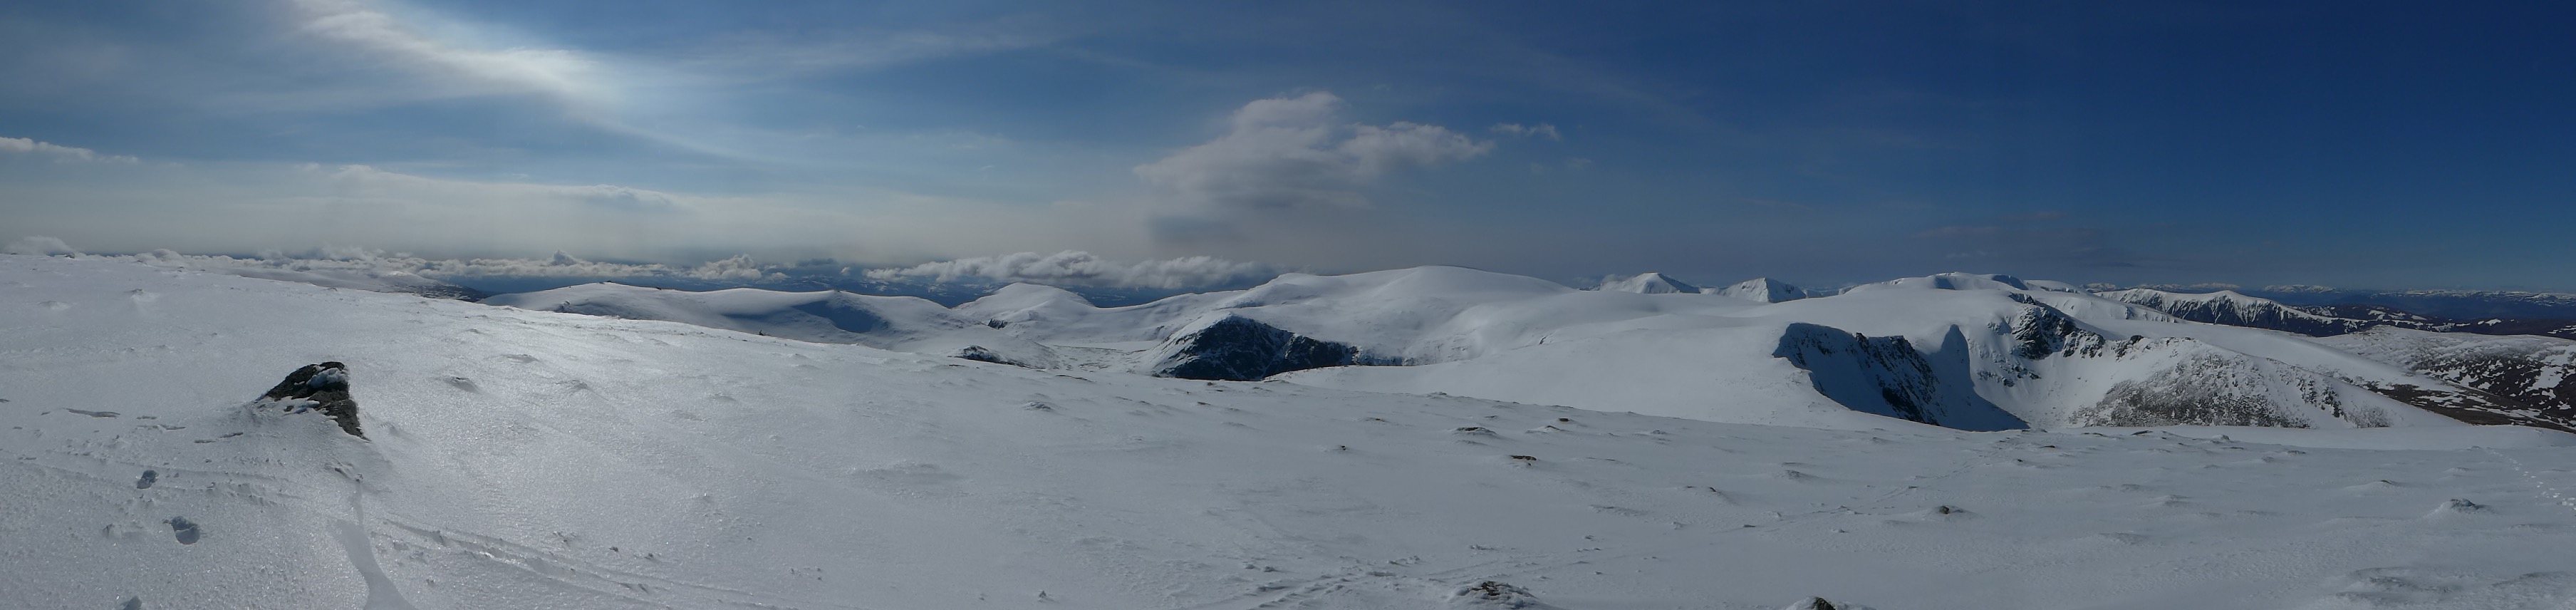 Cairngorm plateau panorama from Cairngorm summit